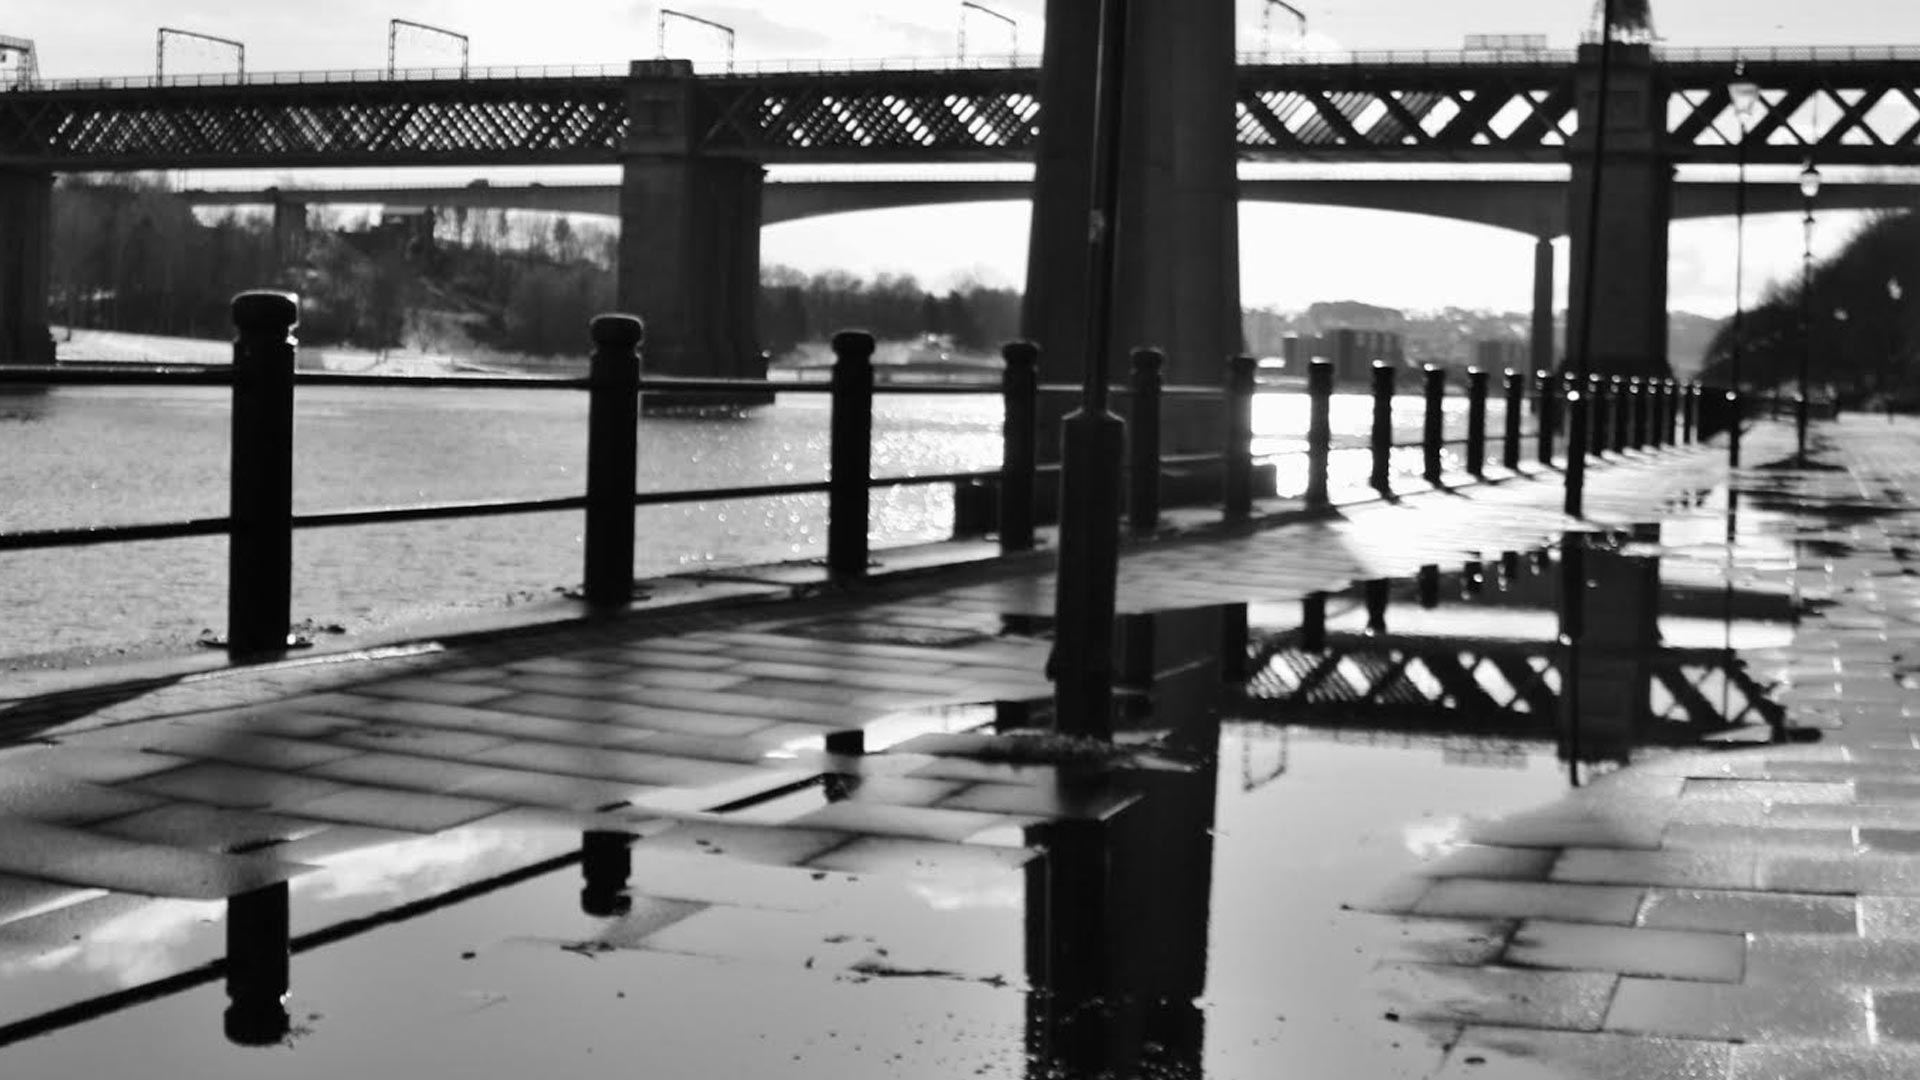 COVID 19 Dreaming Toon Traveller gives a sunless Sunday on the Tyne both barrels